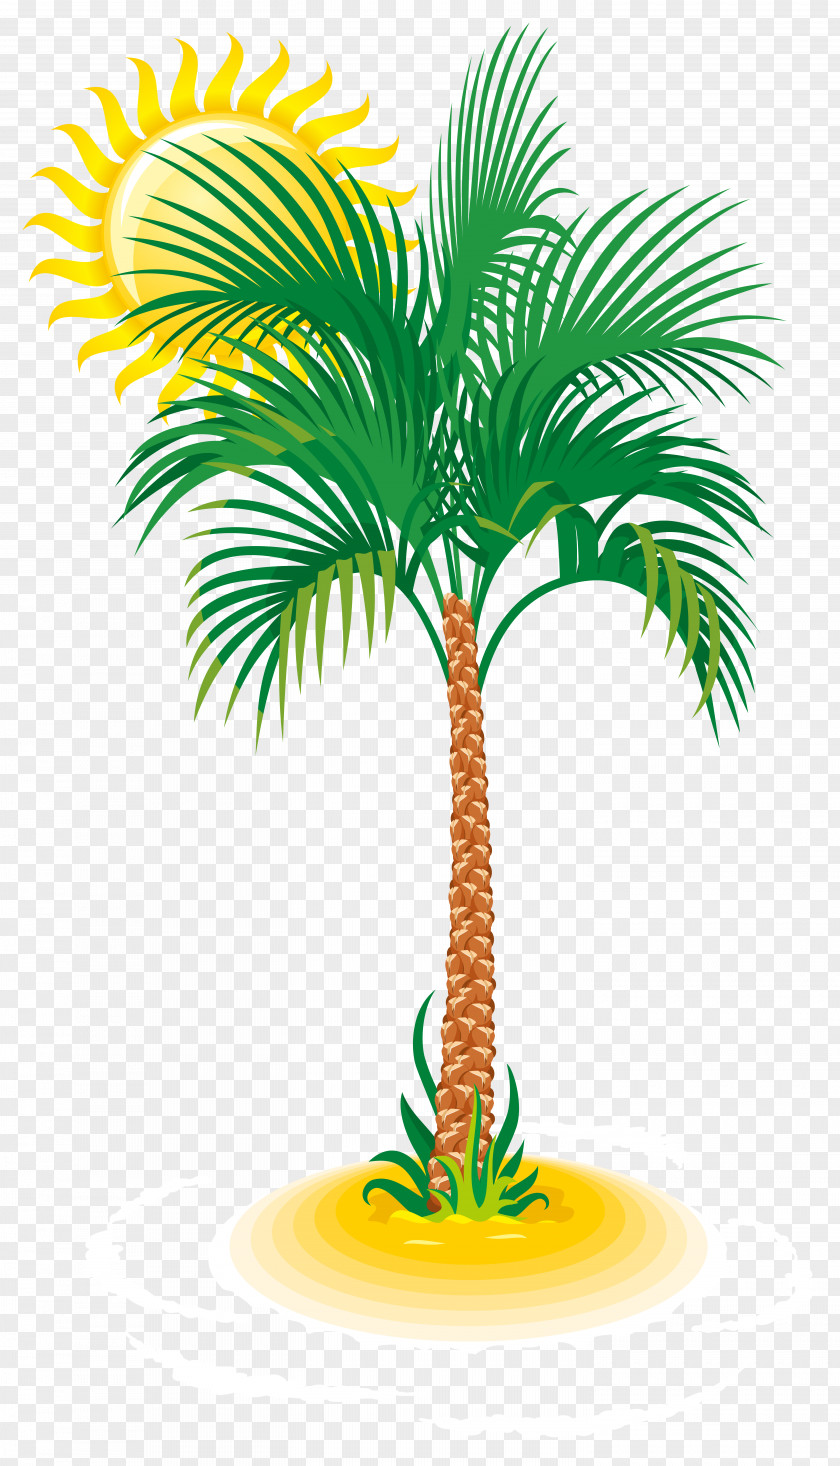 Palm And Sun Clip Art Image Arecaceae Tree PNG